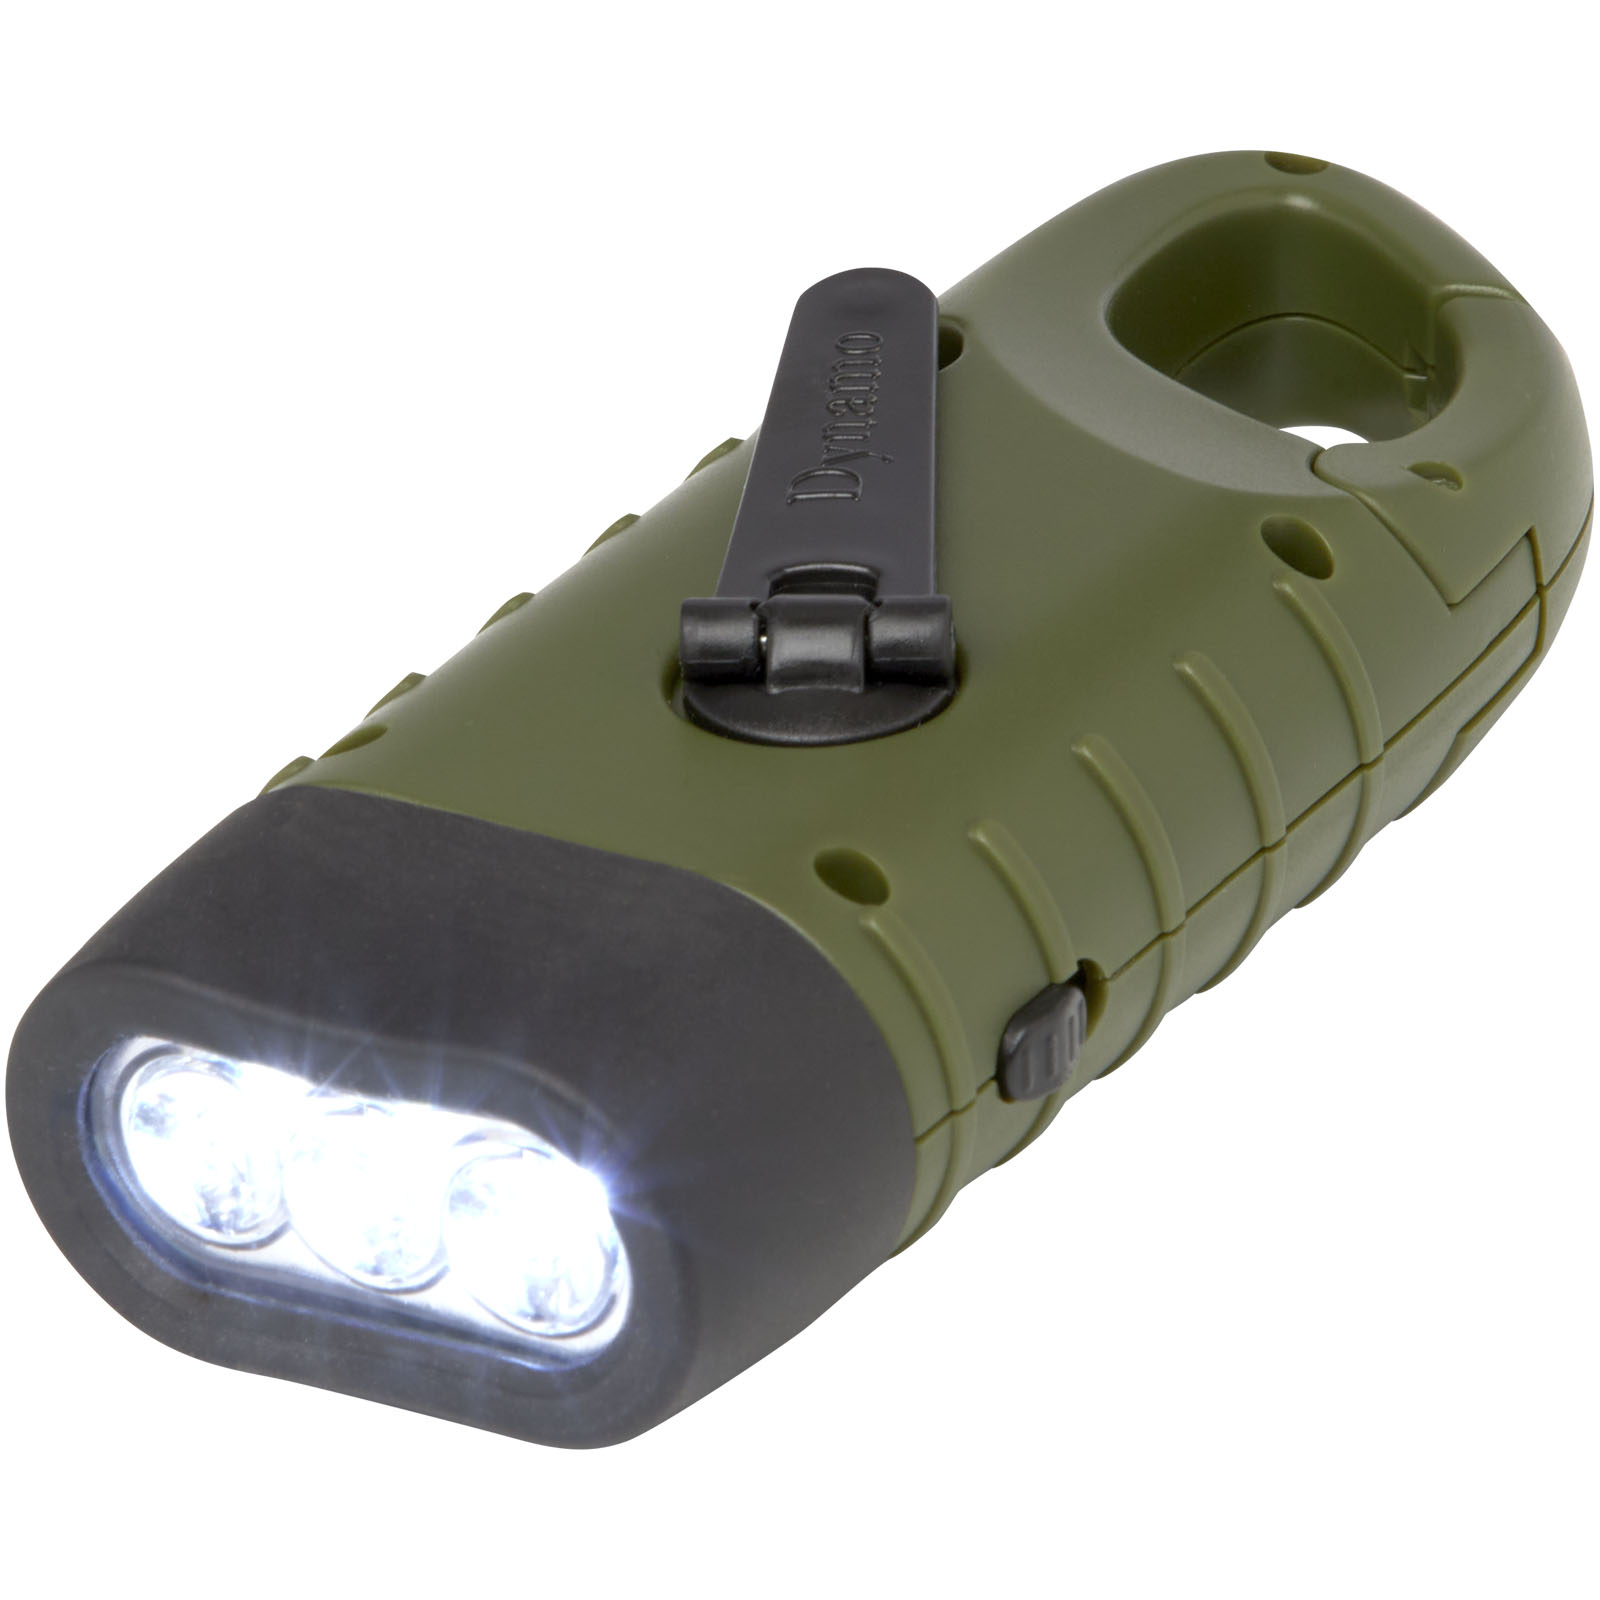 Lamps - Helios recycled plastic solar dynamo flashlight with carabiner